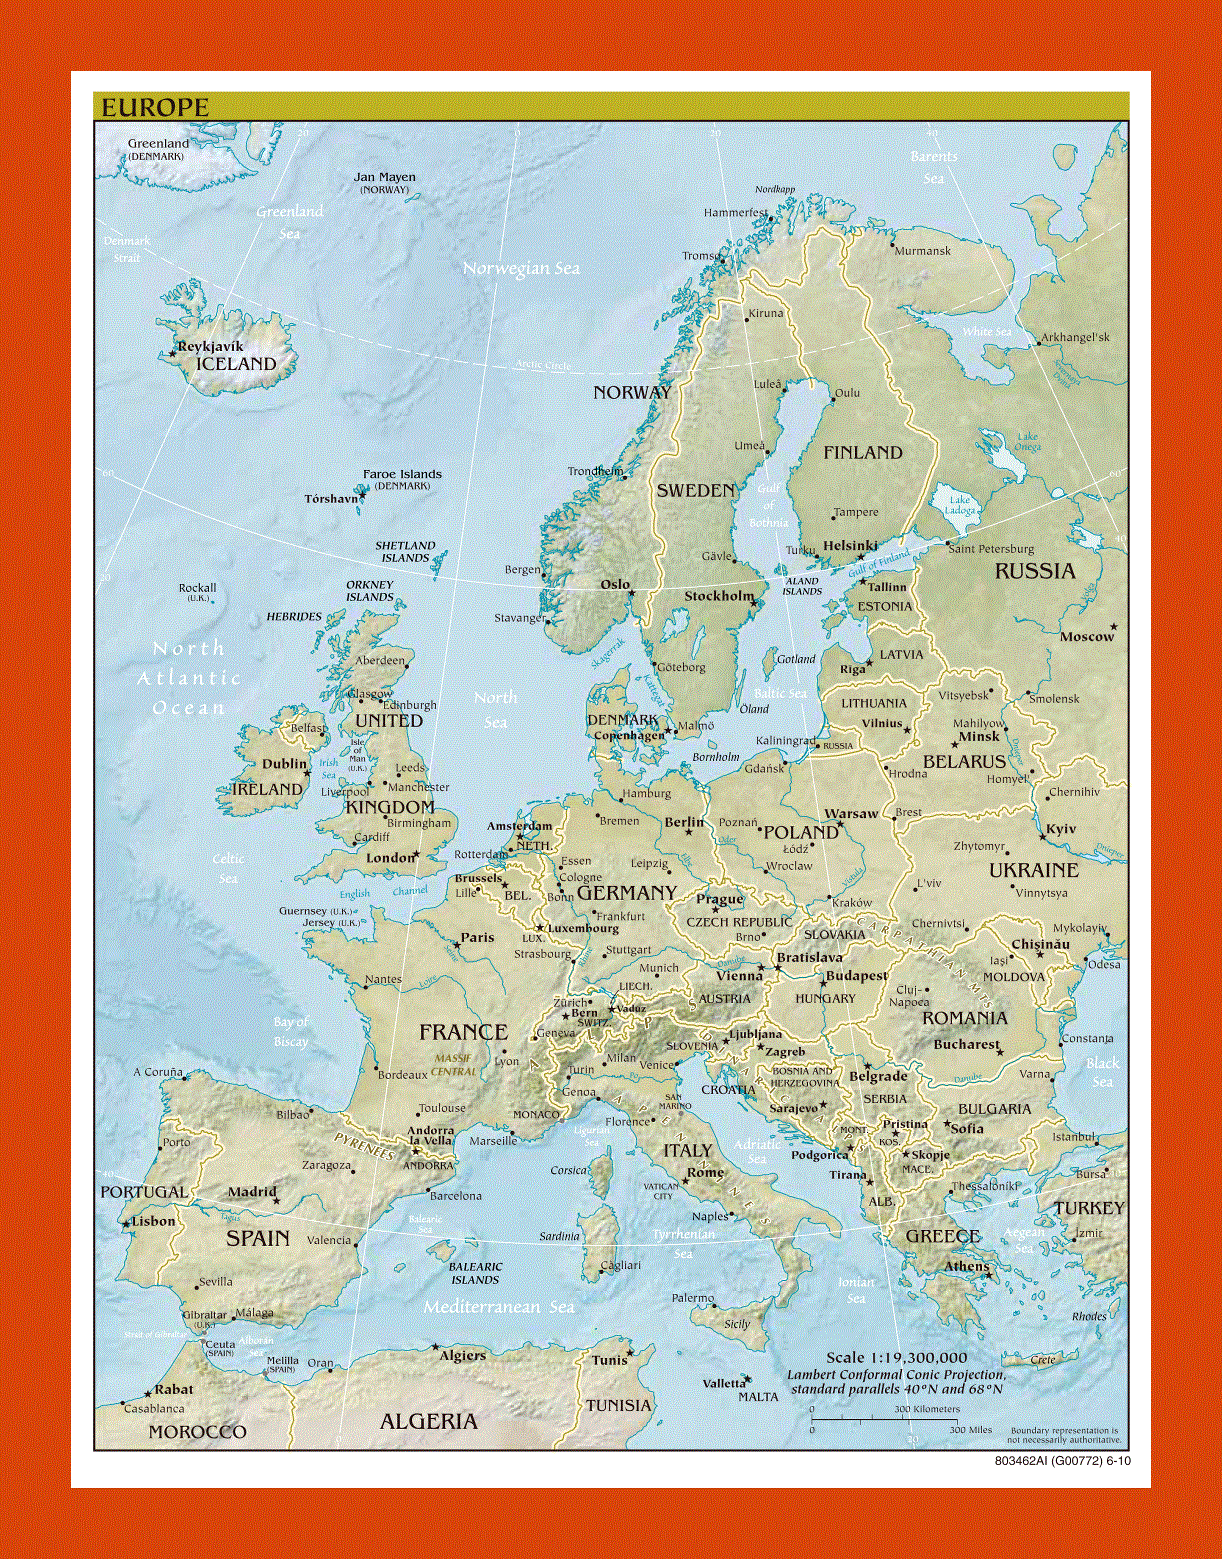 Political map of Europe - 2010